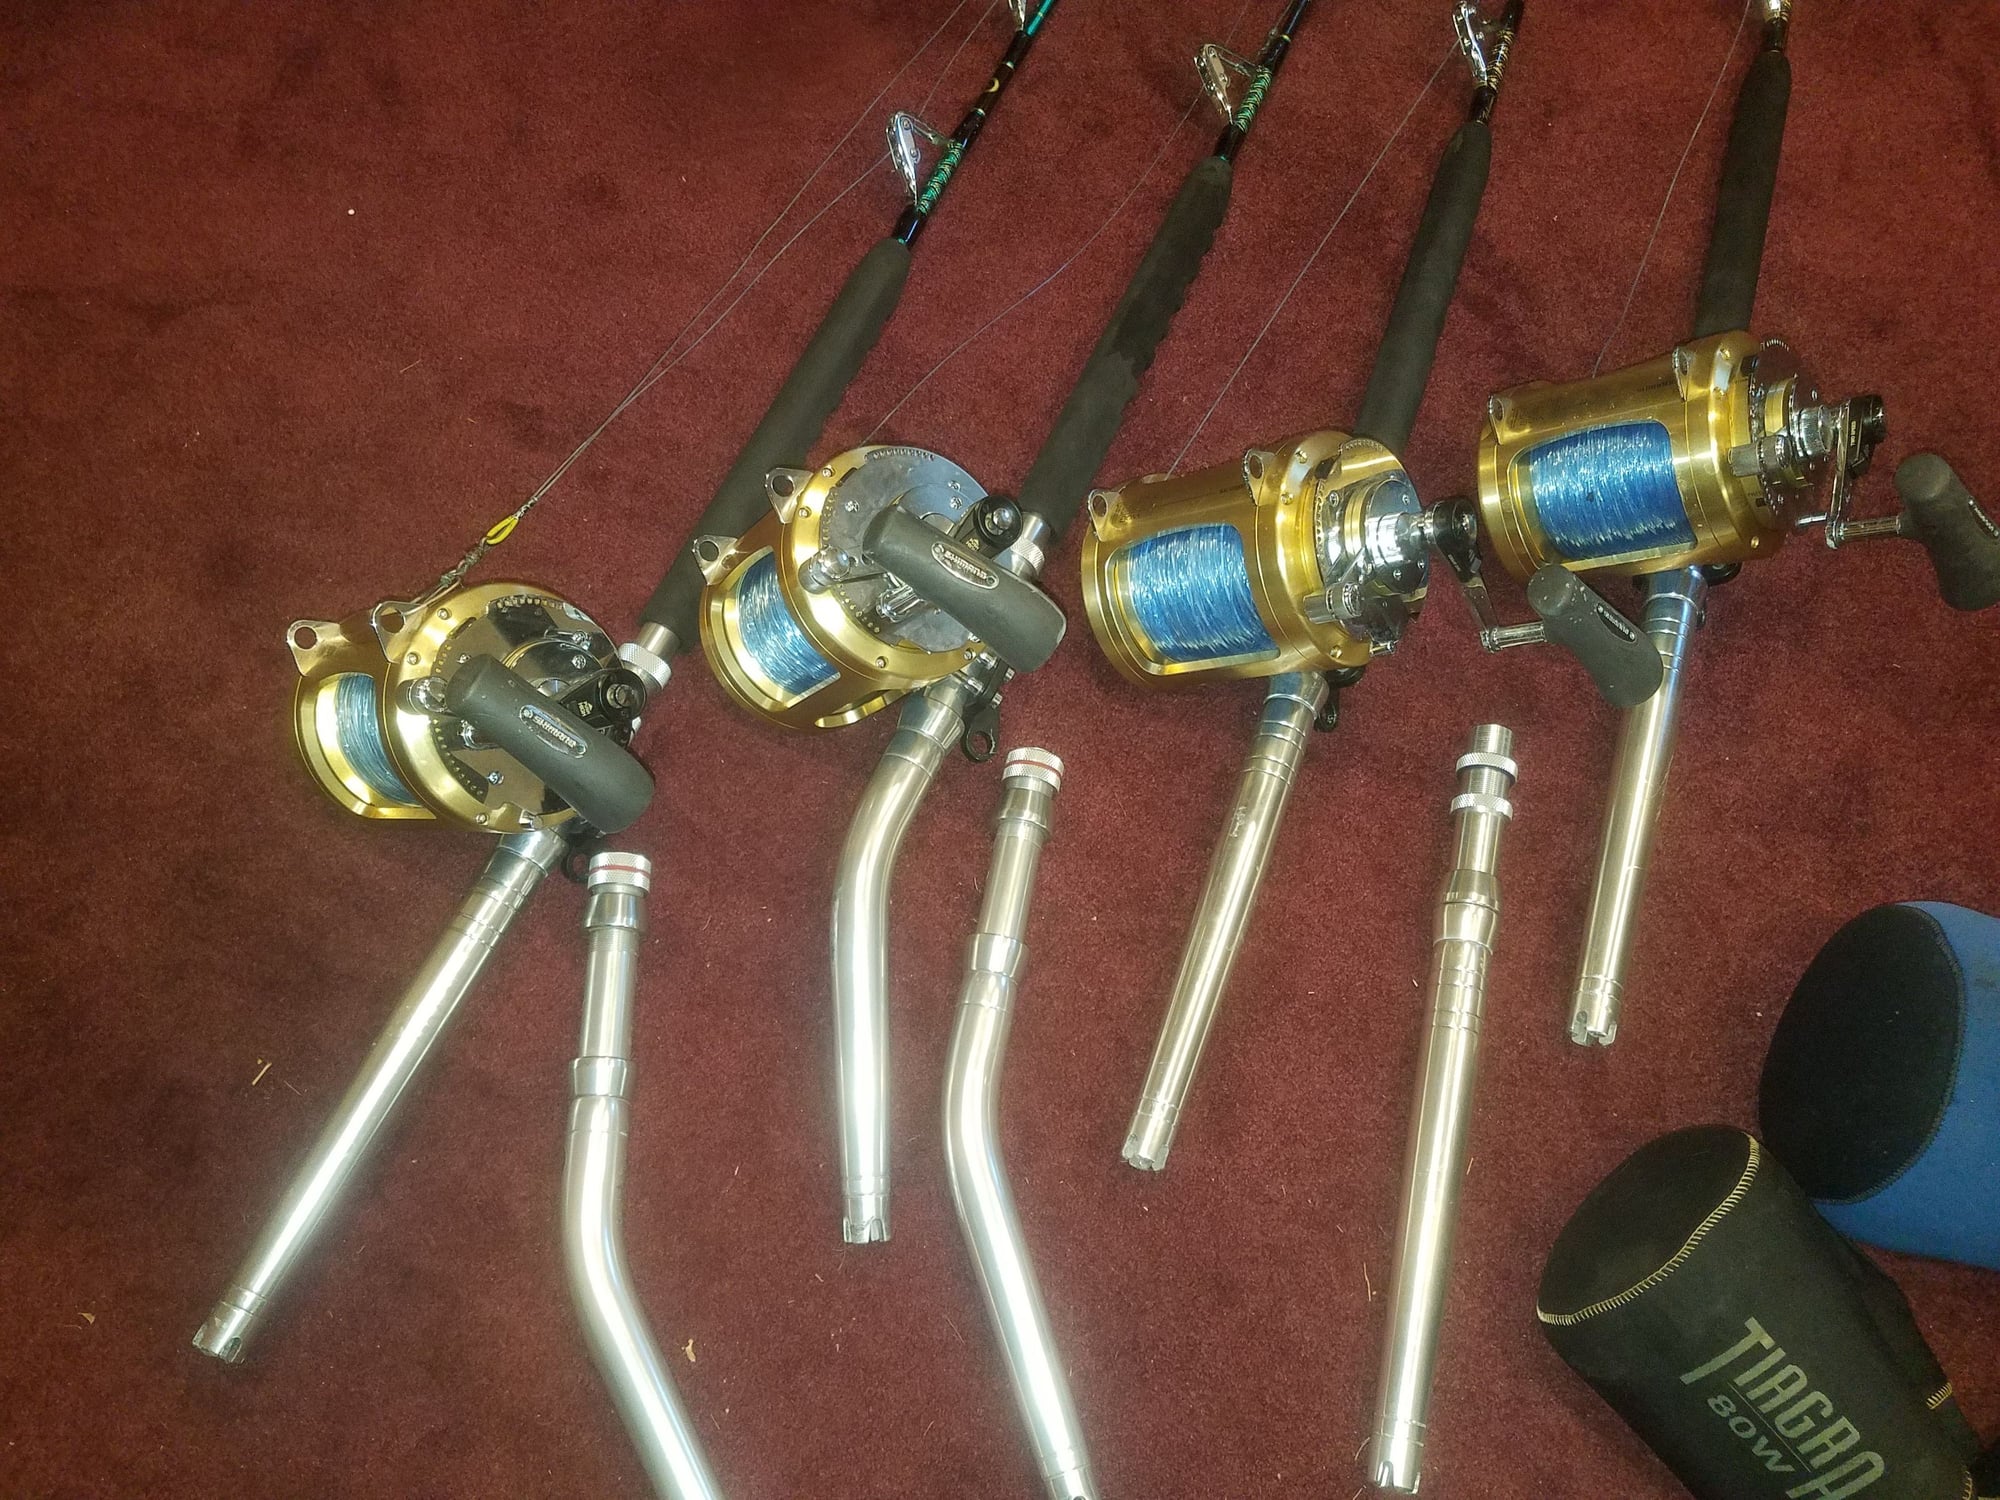 4 Shimano tiagra 80w reels mounted on Fishermans Outfitters short